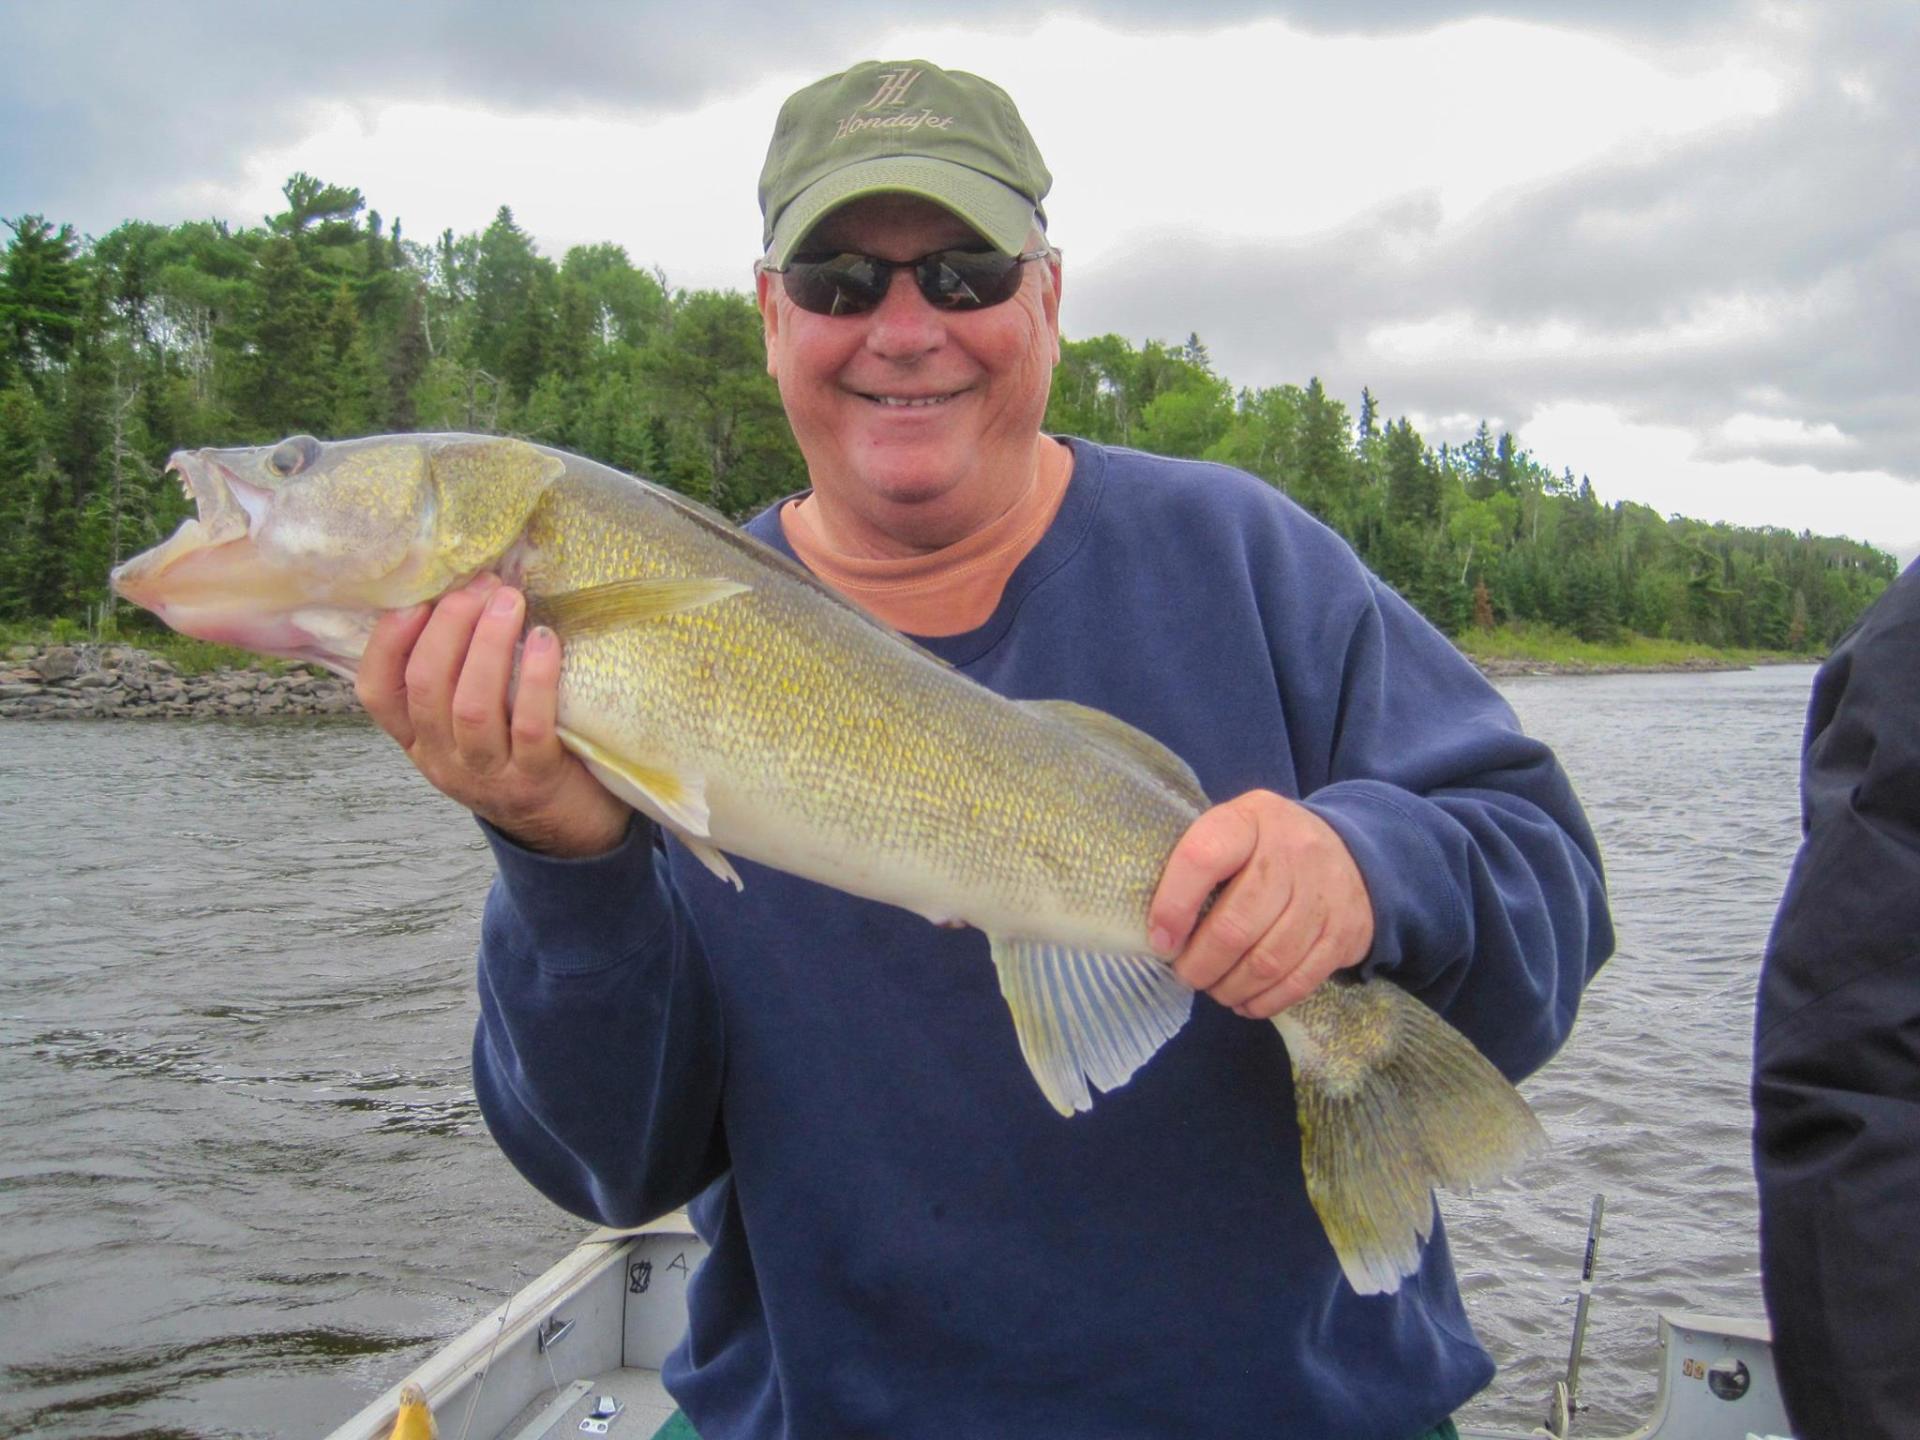 Walleye fish caught by guest at Oak Lake Lodge.